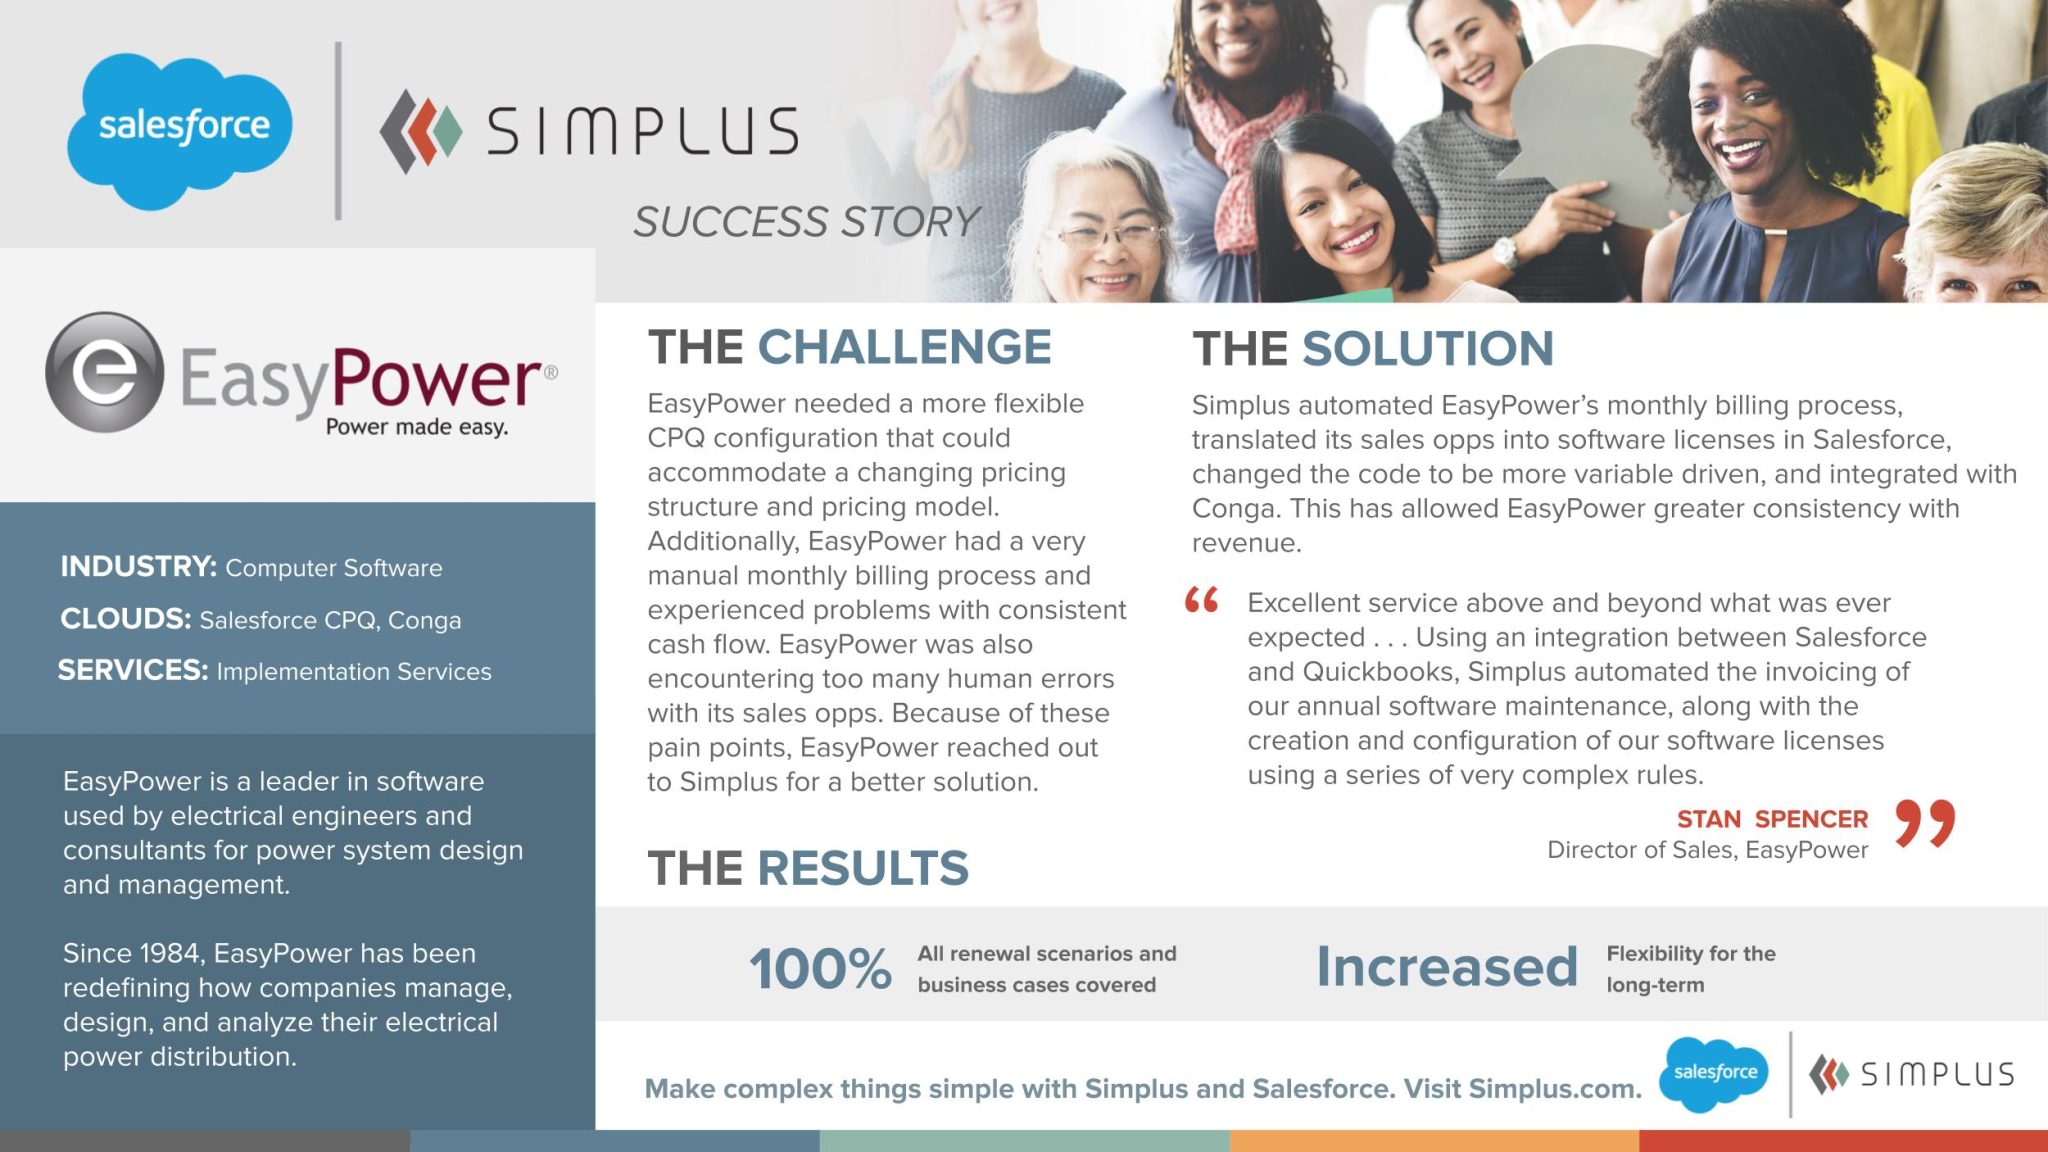 Simplus Salesforce CPQ and CLM shape up business processes